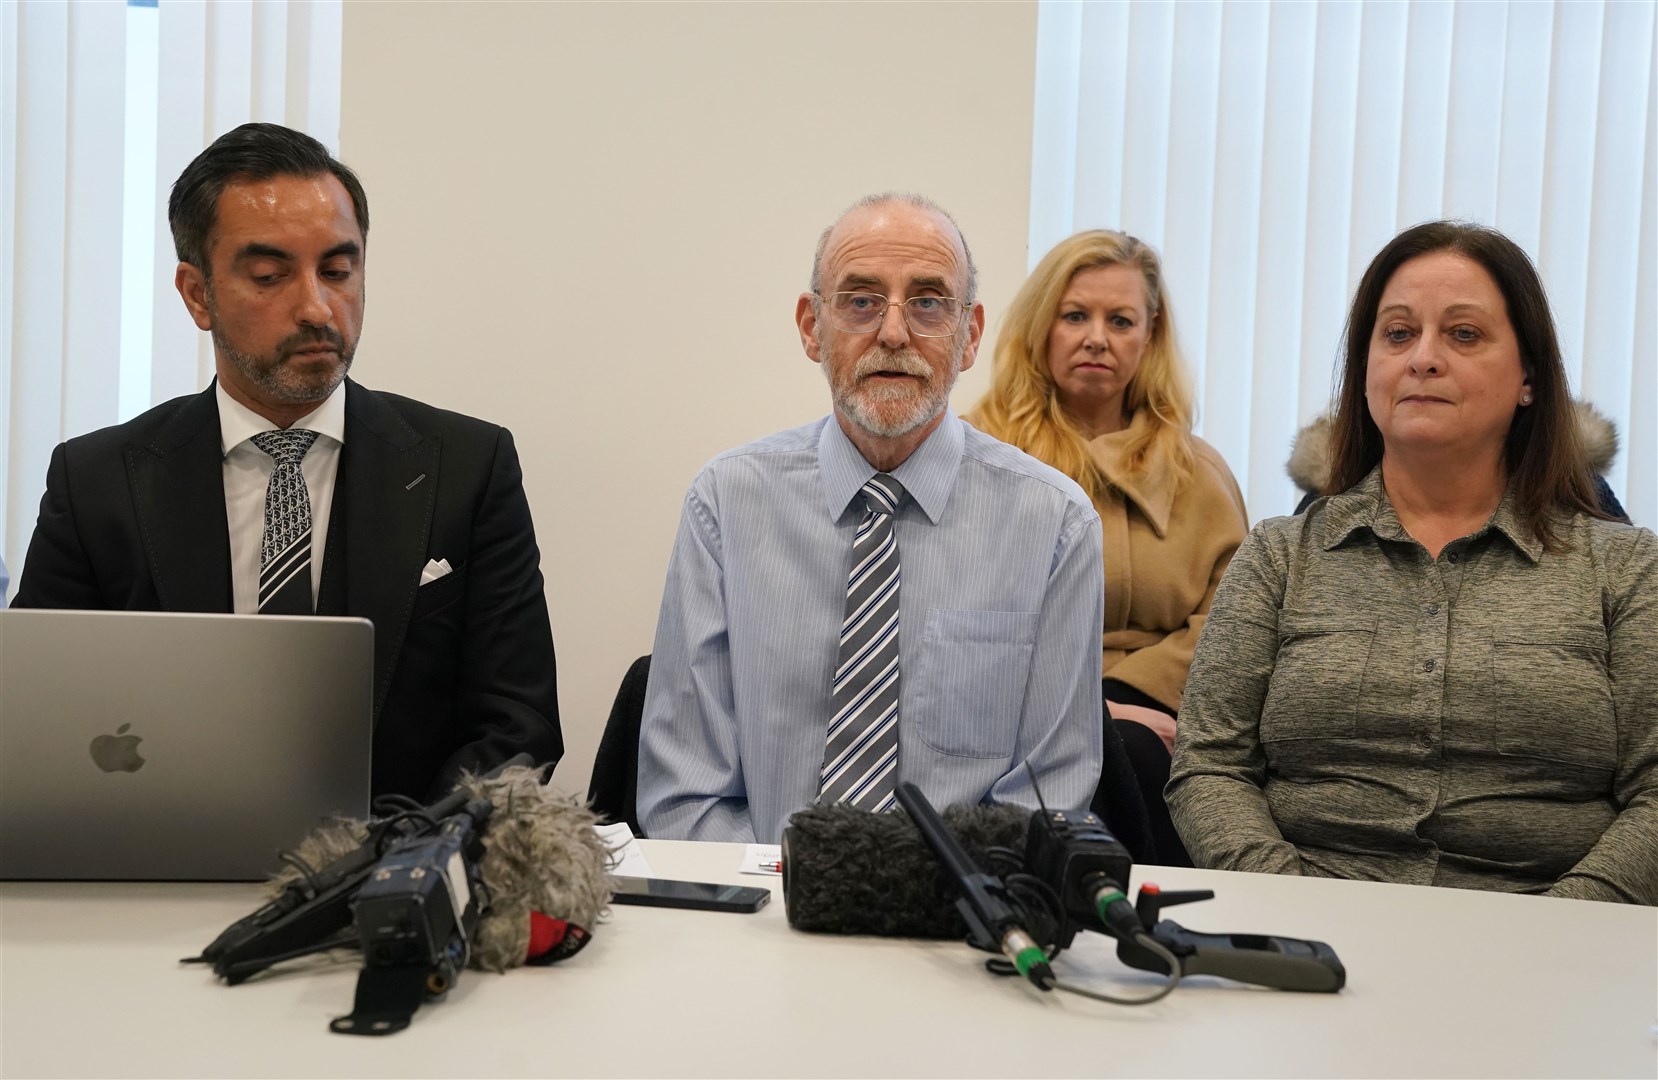 Lawyer Aamer Anwar alongside Alan Wightman, centre, and Helen Lee Keenan, right, from the Scottish members of the Covid-19 Bereaved Families for Justice group (Andrew Milligan/PA)